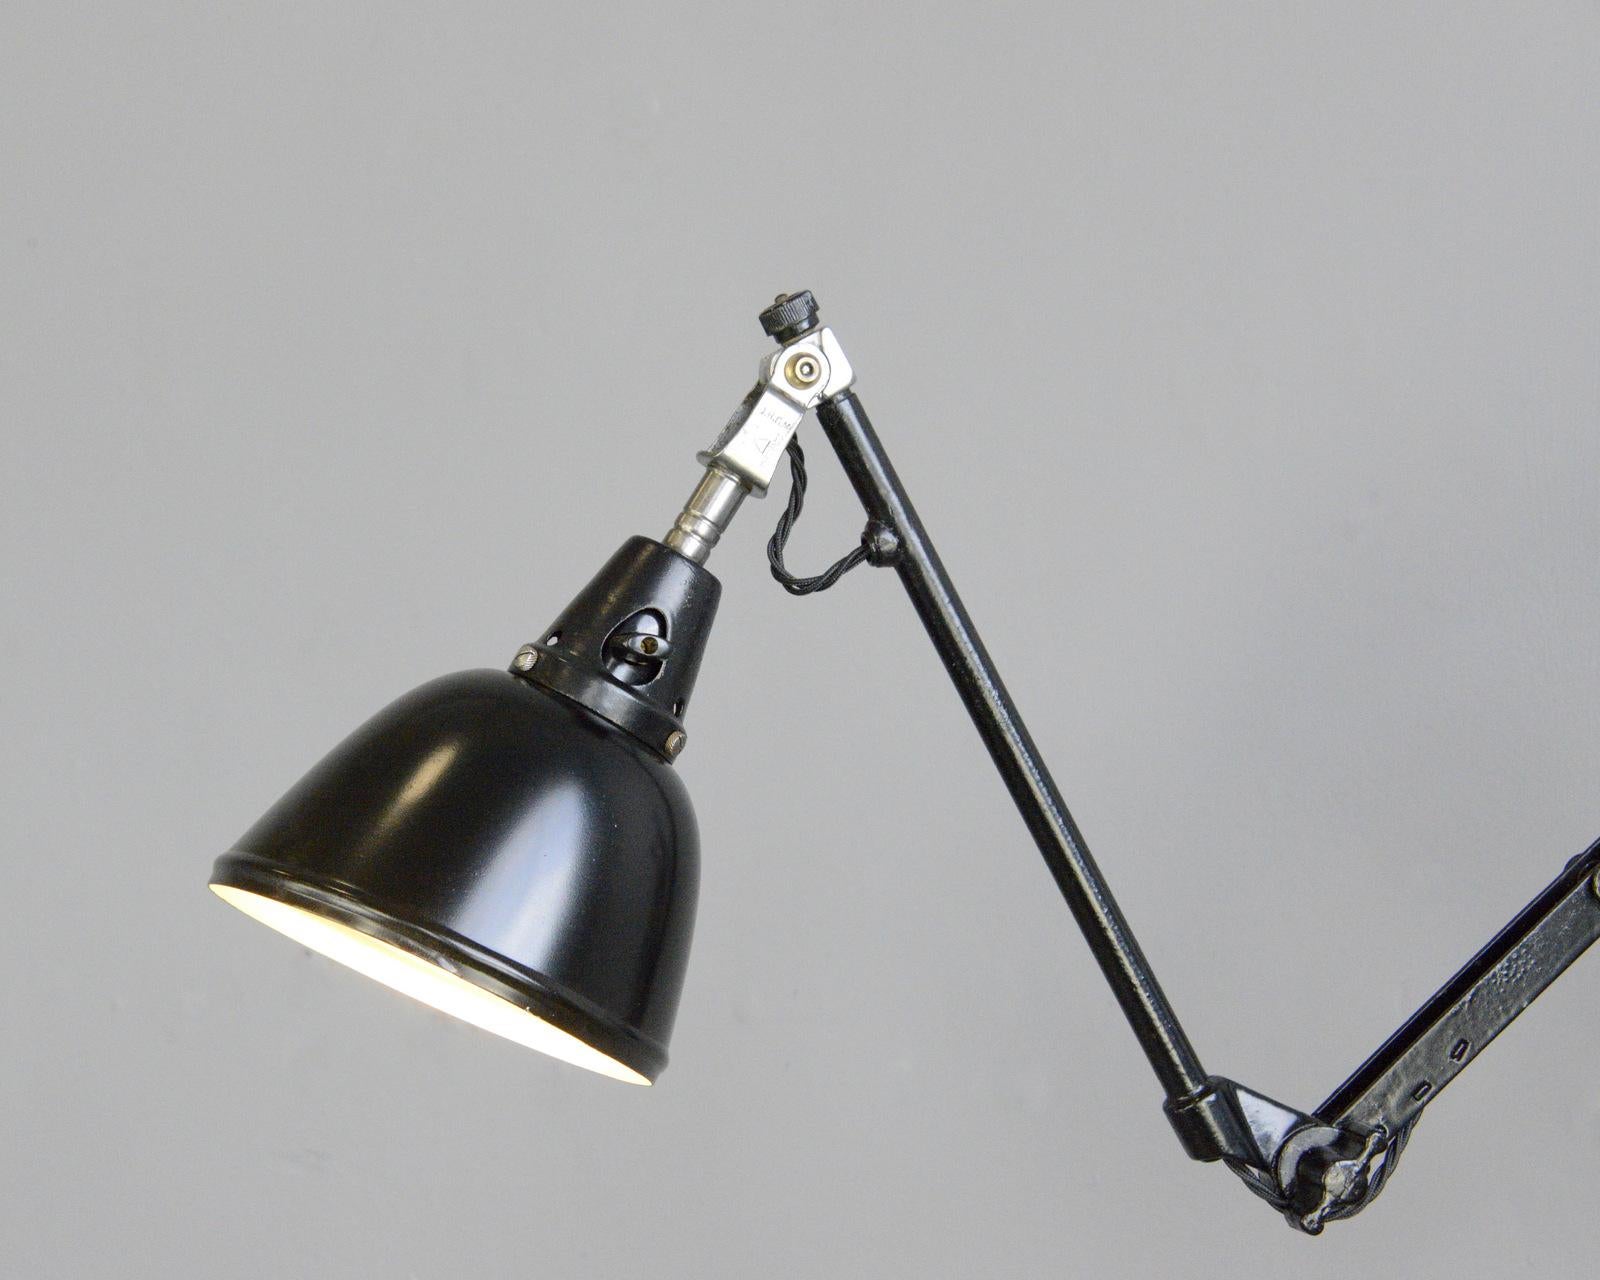 Curt Fischer Midgard scissor lamp, circa 1930s

- Extendable scissor mechanism
- Aluminium shade
- Takes E27 fitting bulbs
- On/Off Switch on the cable
- Designed by Curt Fischer
- Produced by Midgard, Auma
- German ~ 1930s
- Measures: 16cm